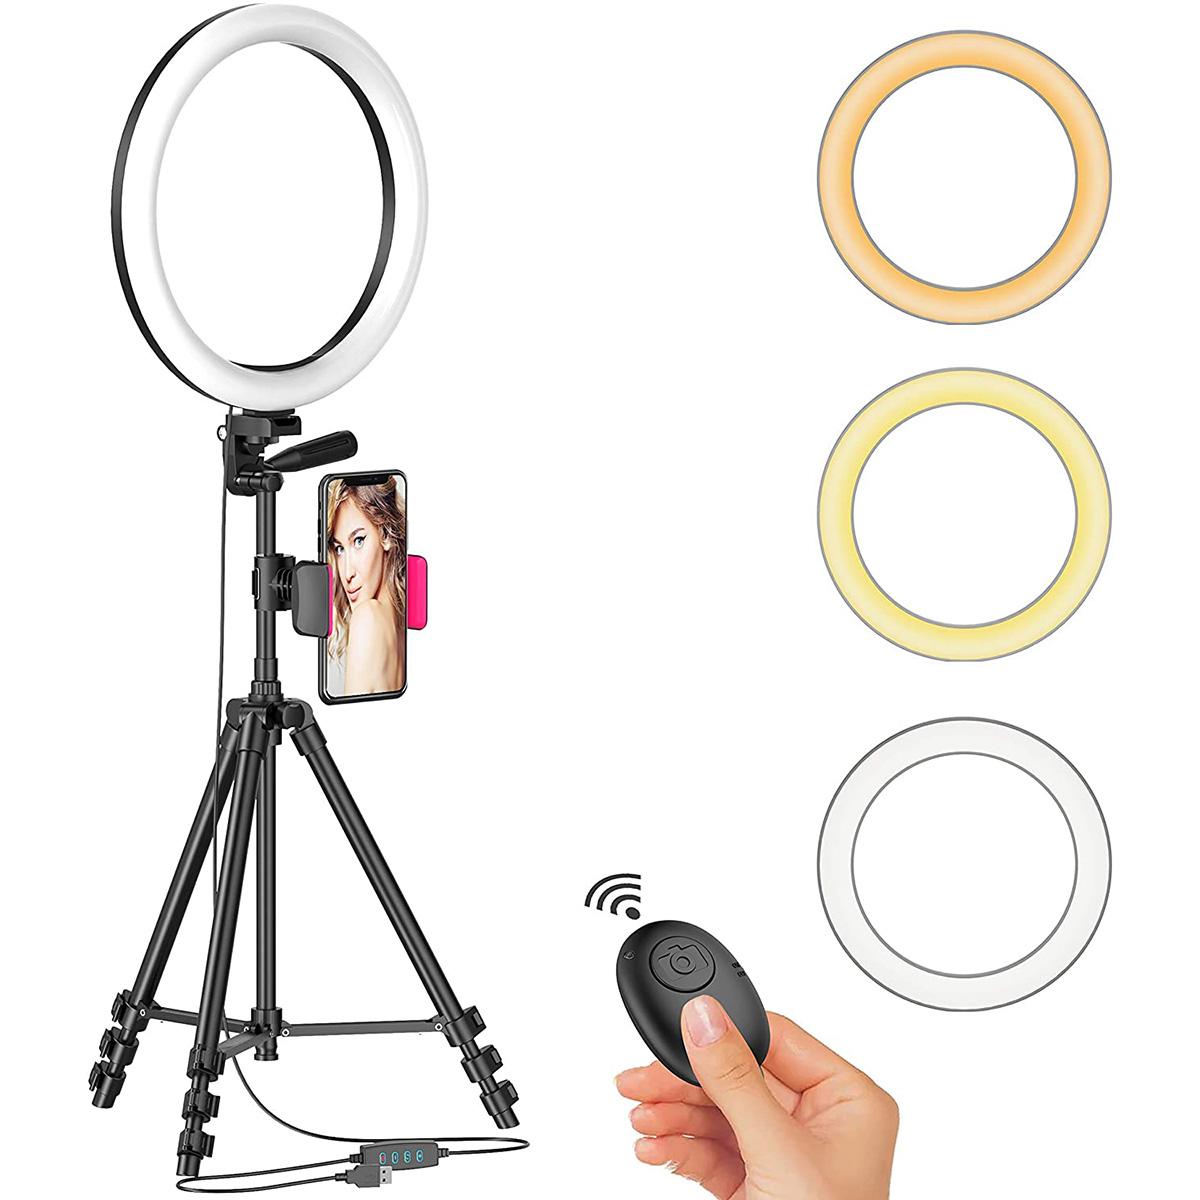 LED Selfie Ring Light with Tripod Stand for $24.99 Shipped